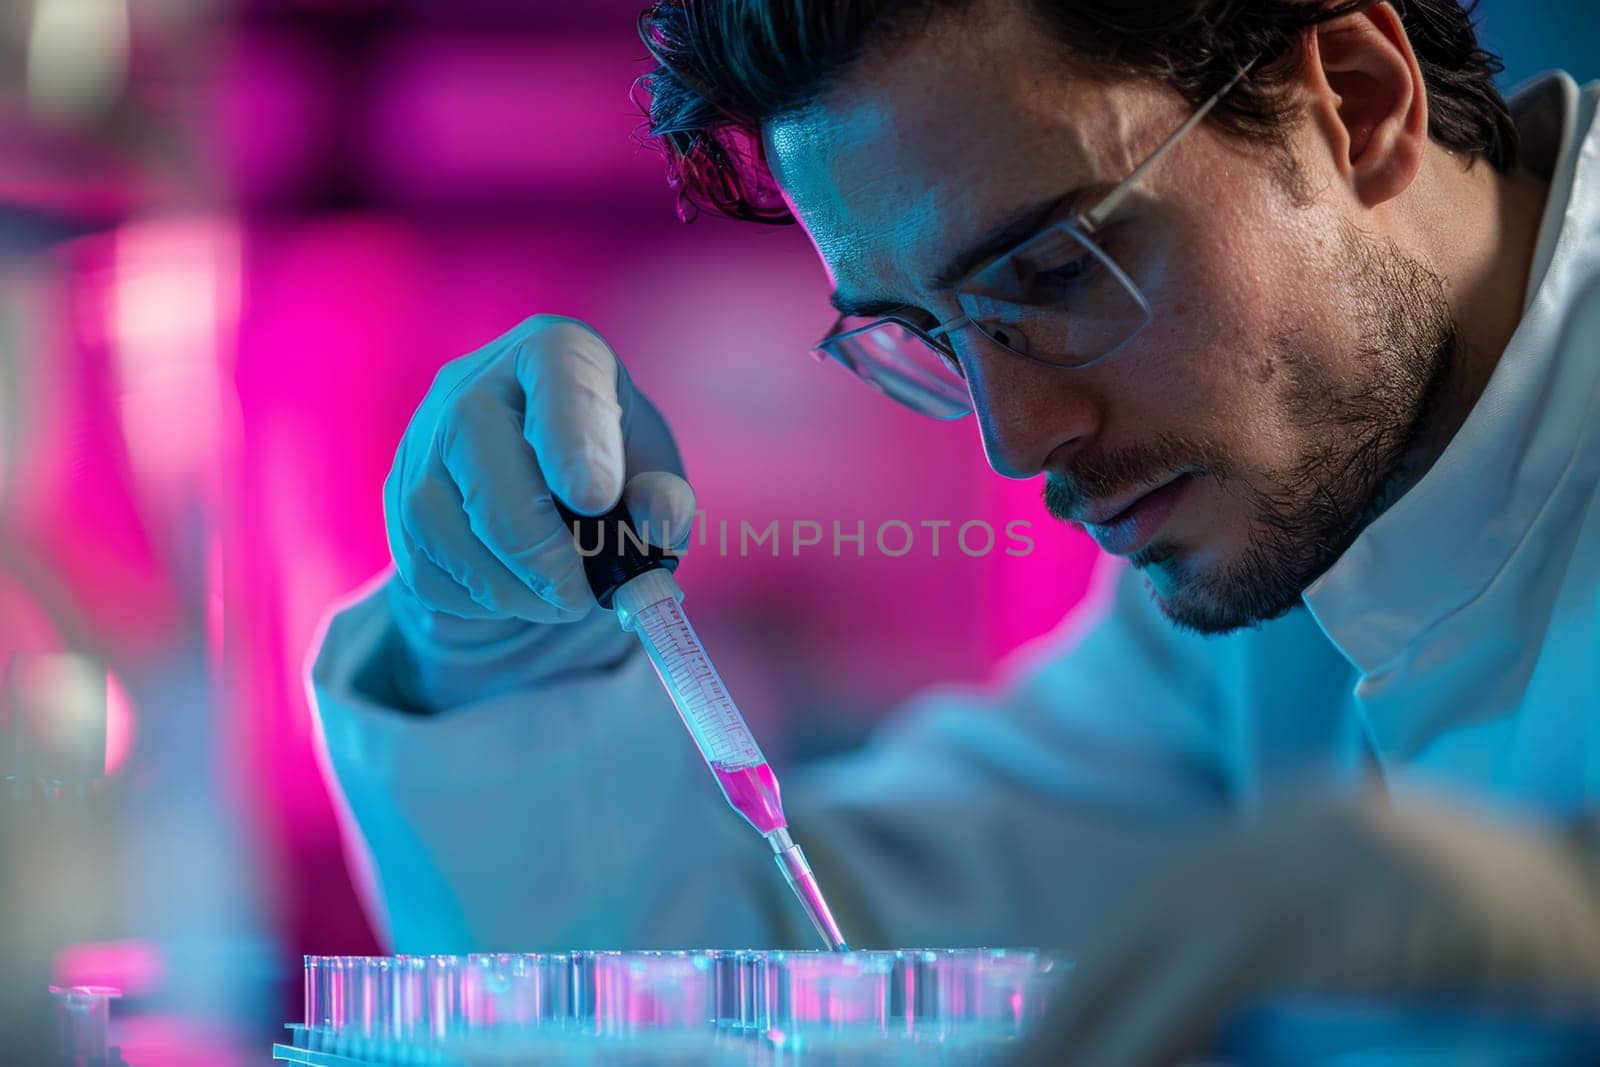 The scientist fills the microplate with a pipette in the lab for biological or chemical analysis.